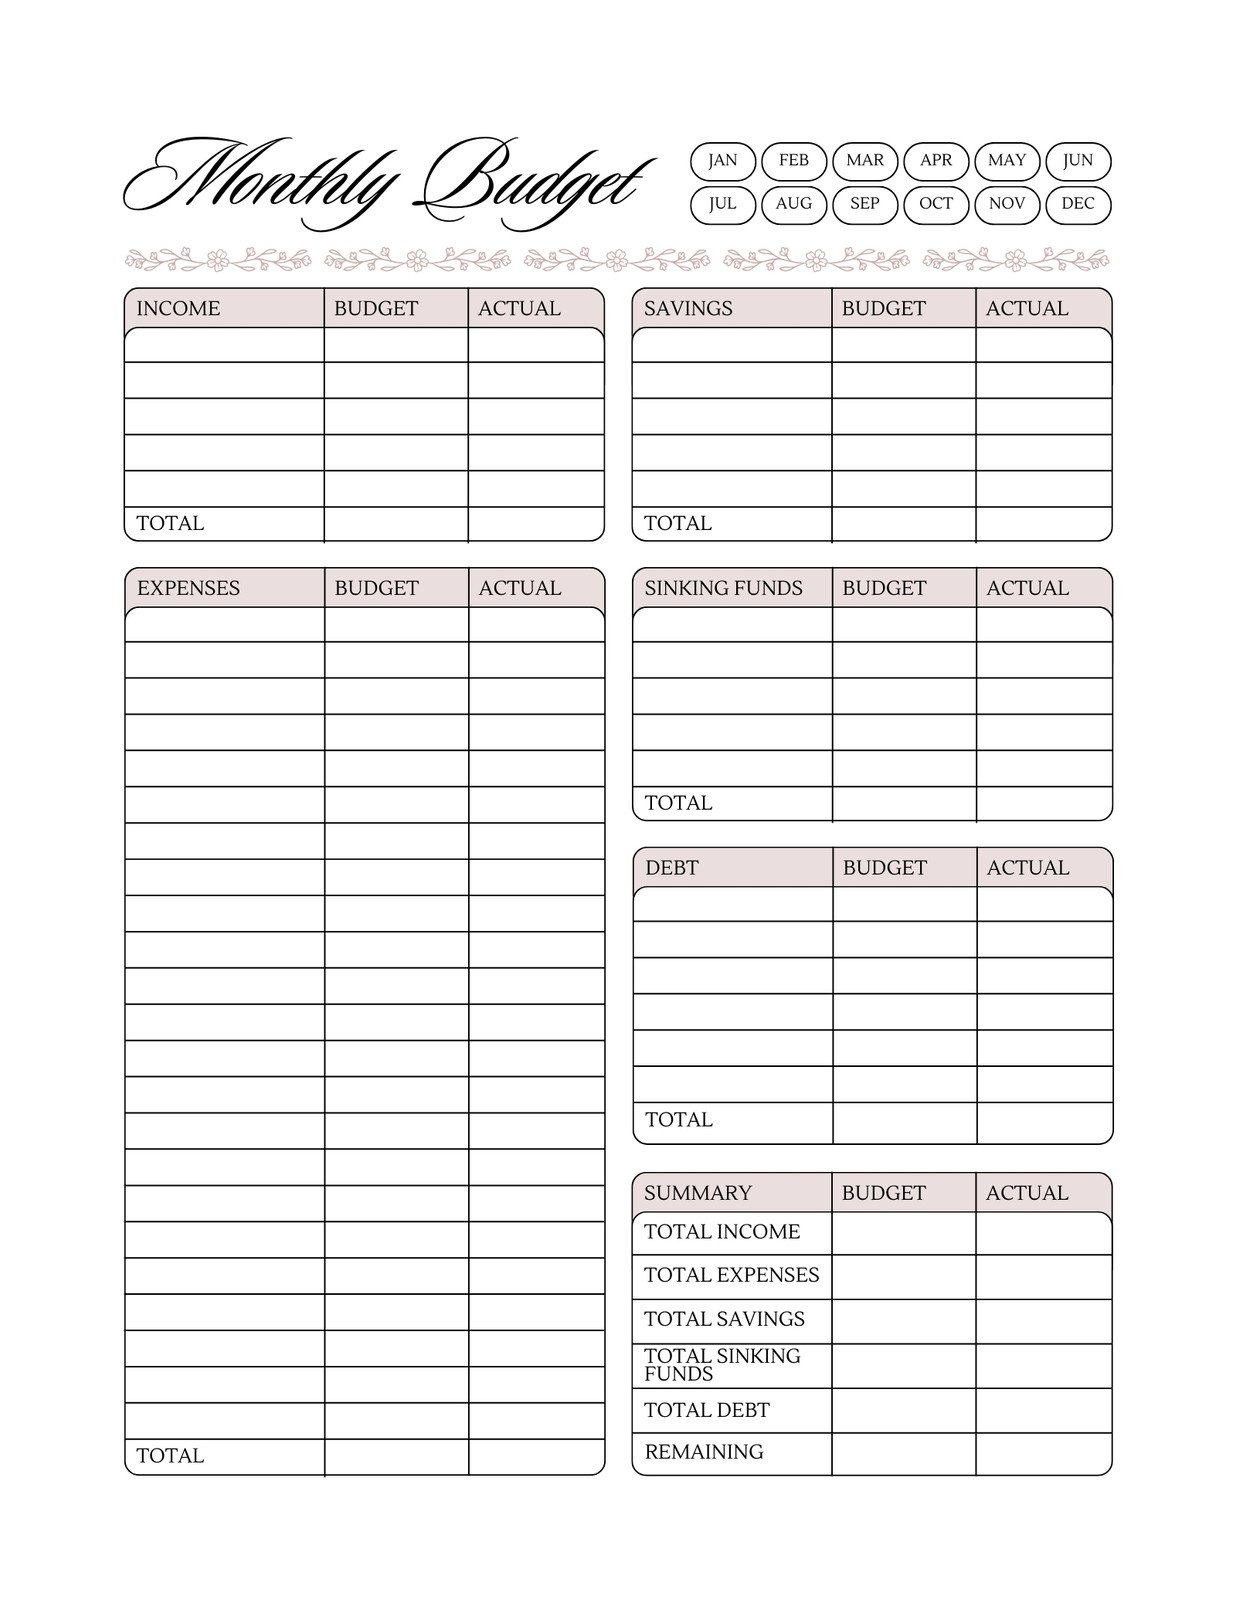 Free And Customizable Budget Templates throughout Budgeting Charts Free Printable